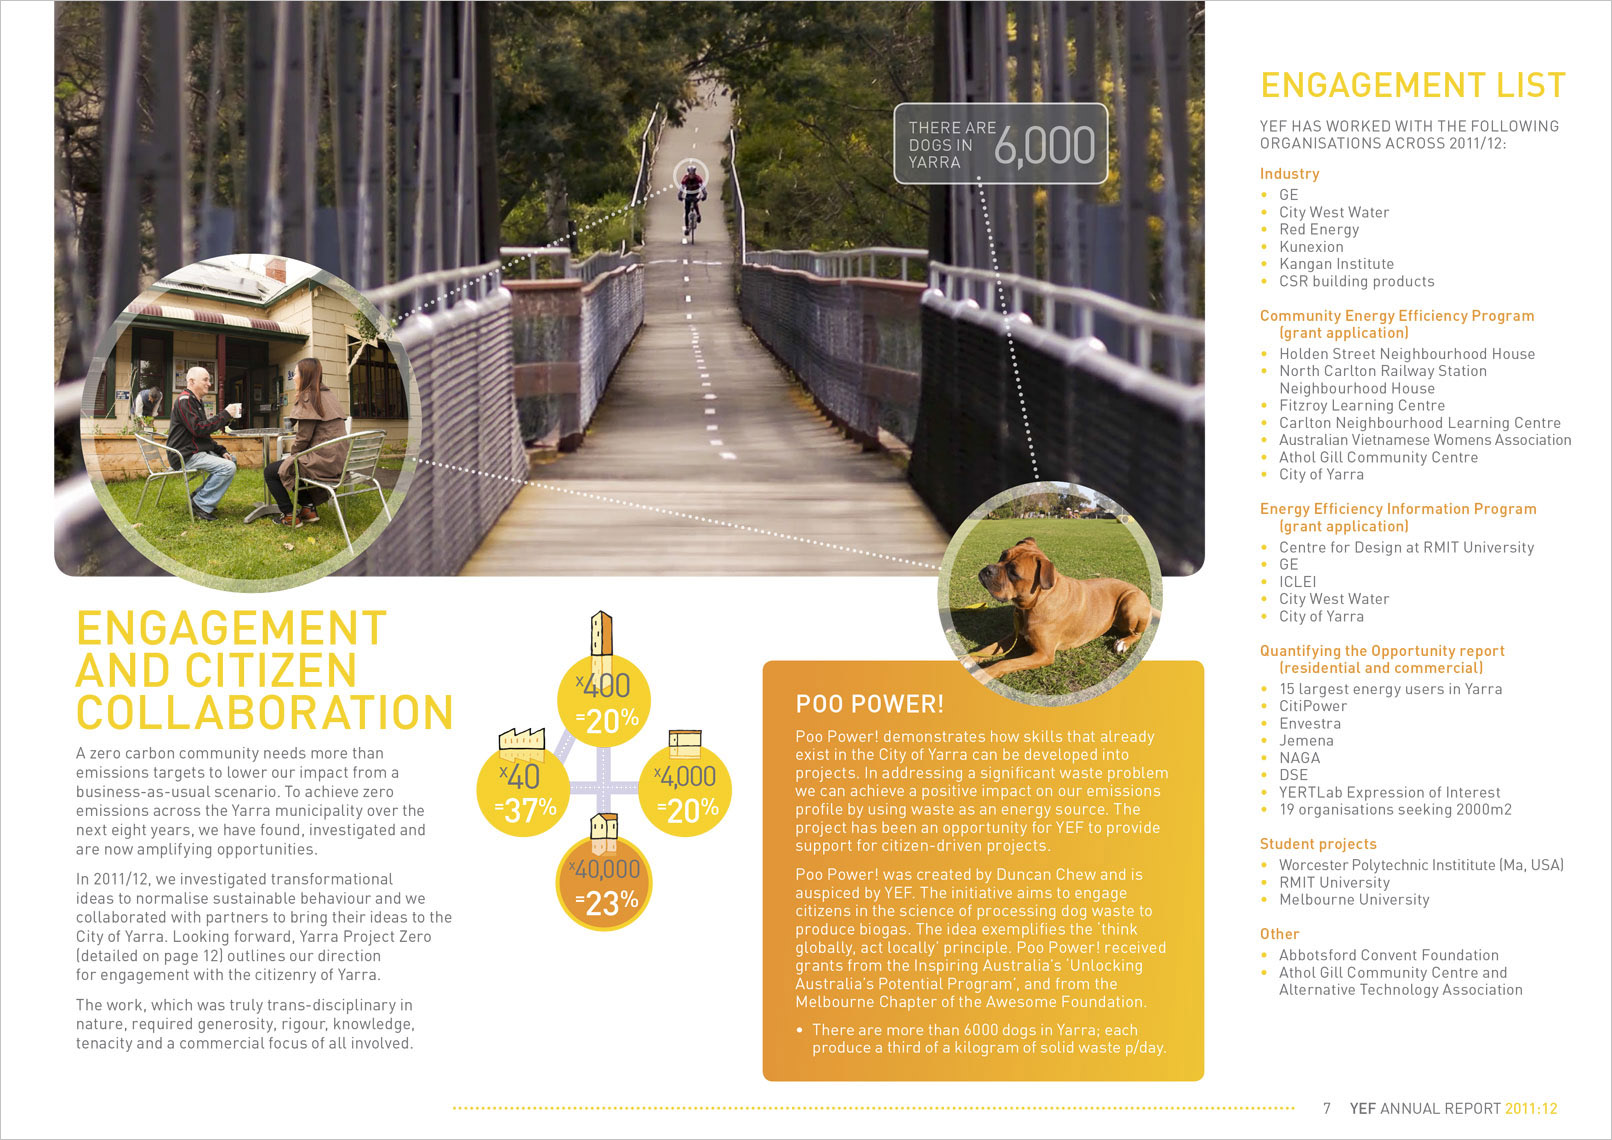 p7 Annual Report design by Shane Nagle. YEF Yarra Energy Foundation Annual Report 2012